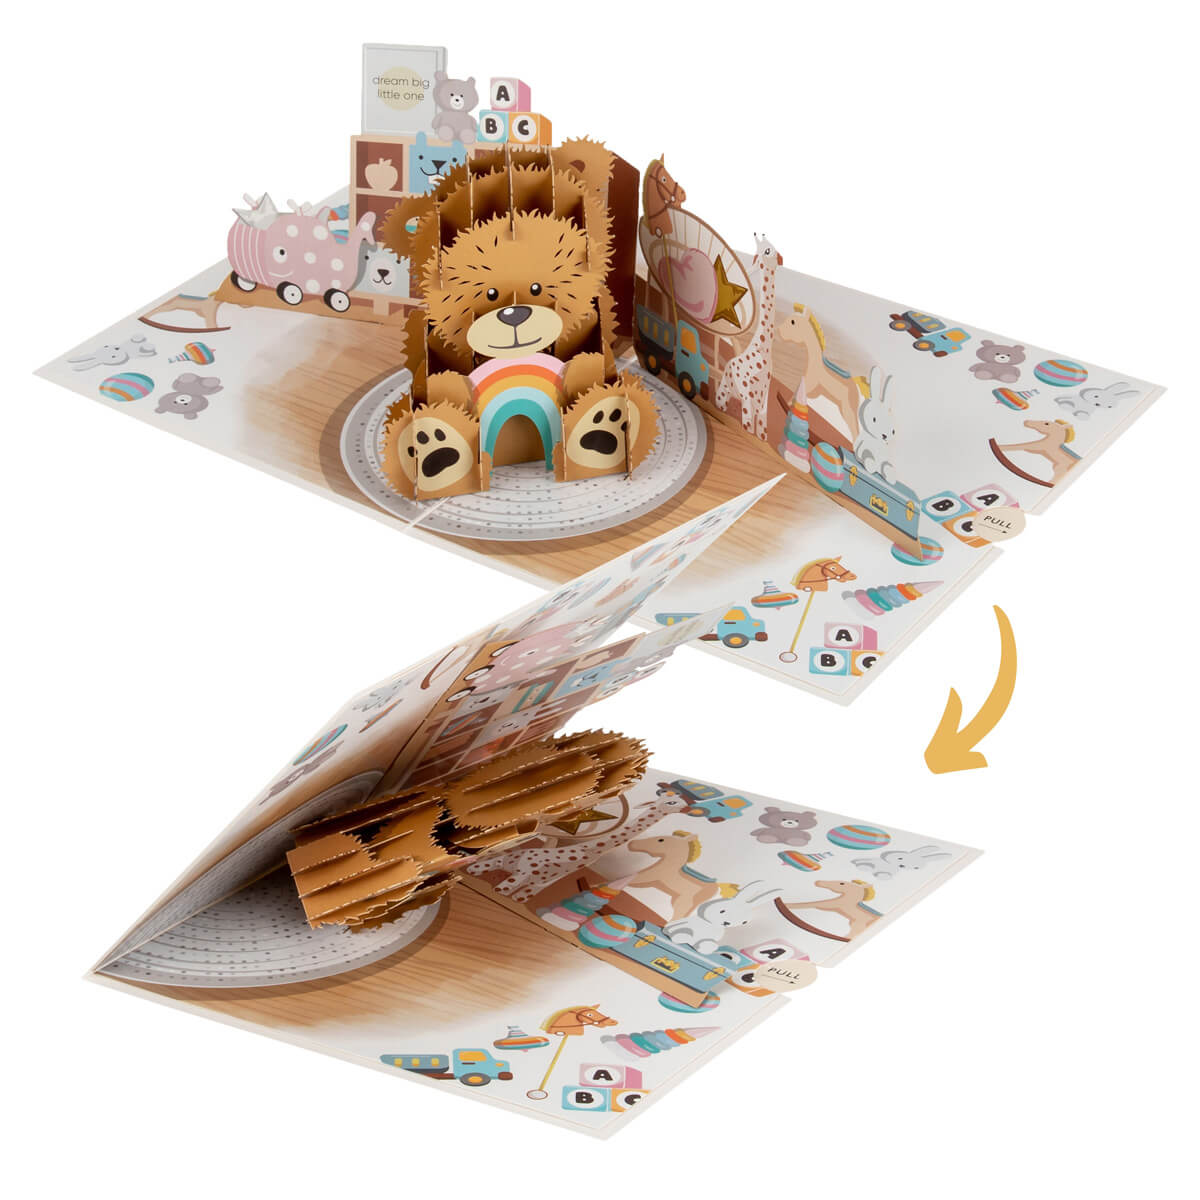 Image of the Cardology New Baby Bear Pop Up Card closing.